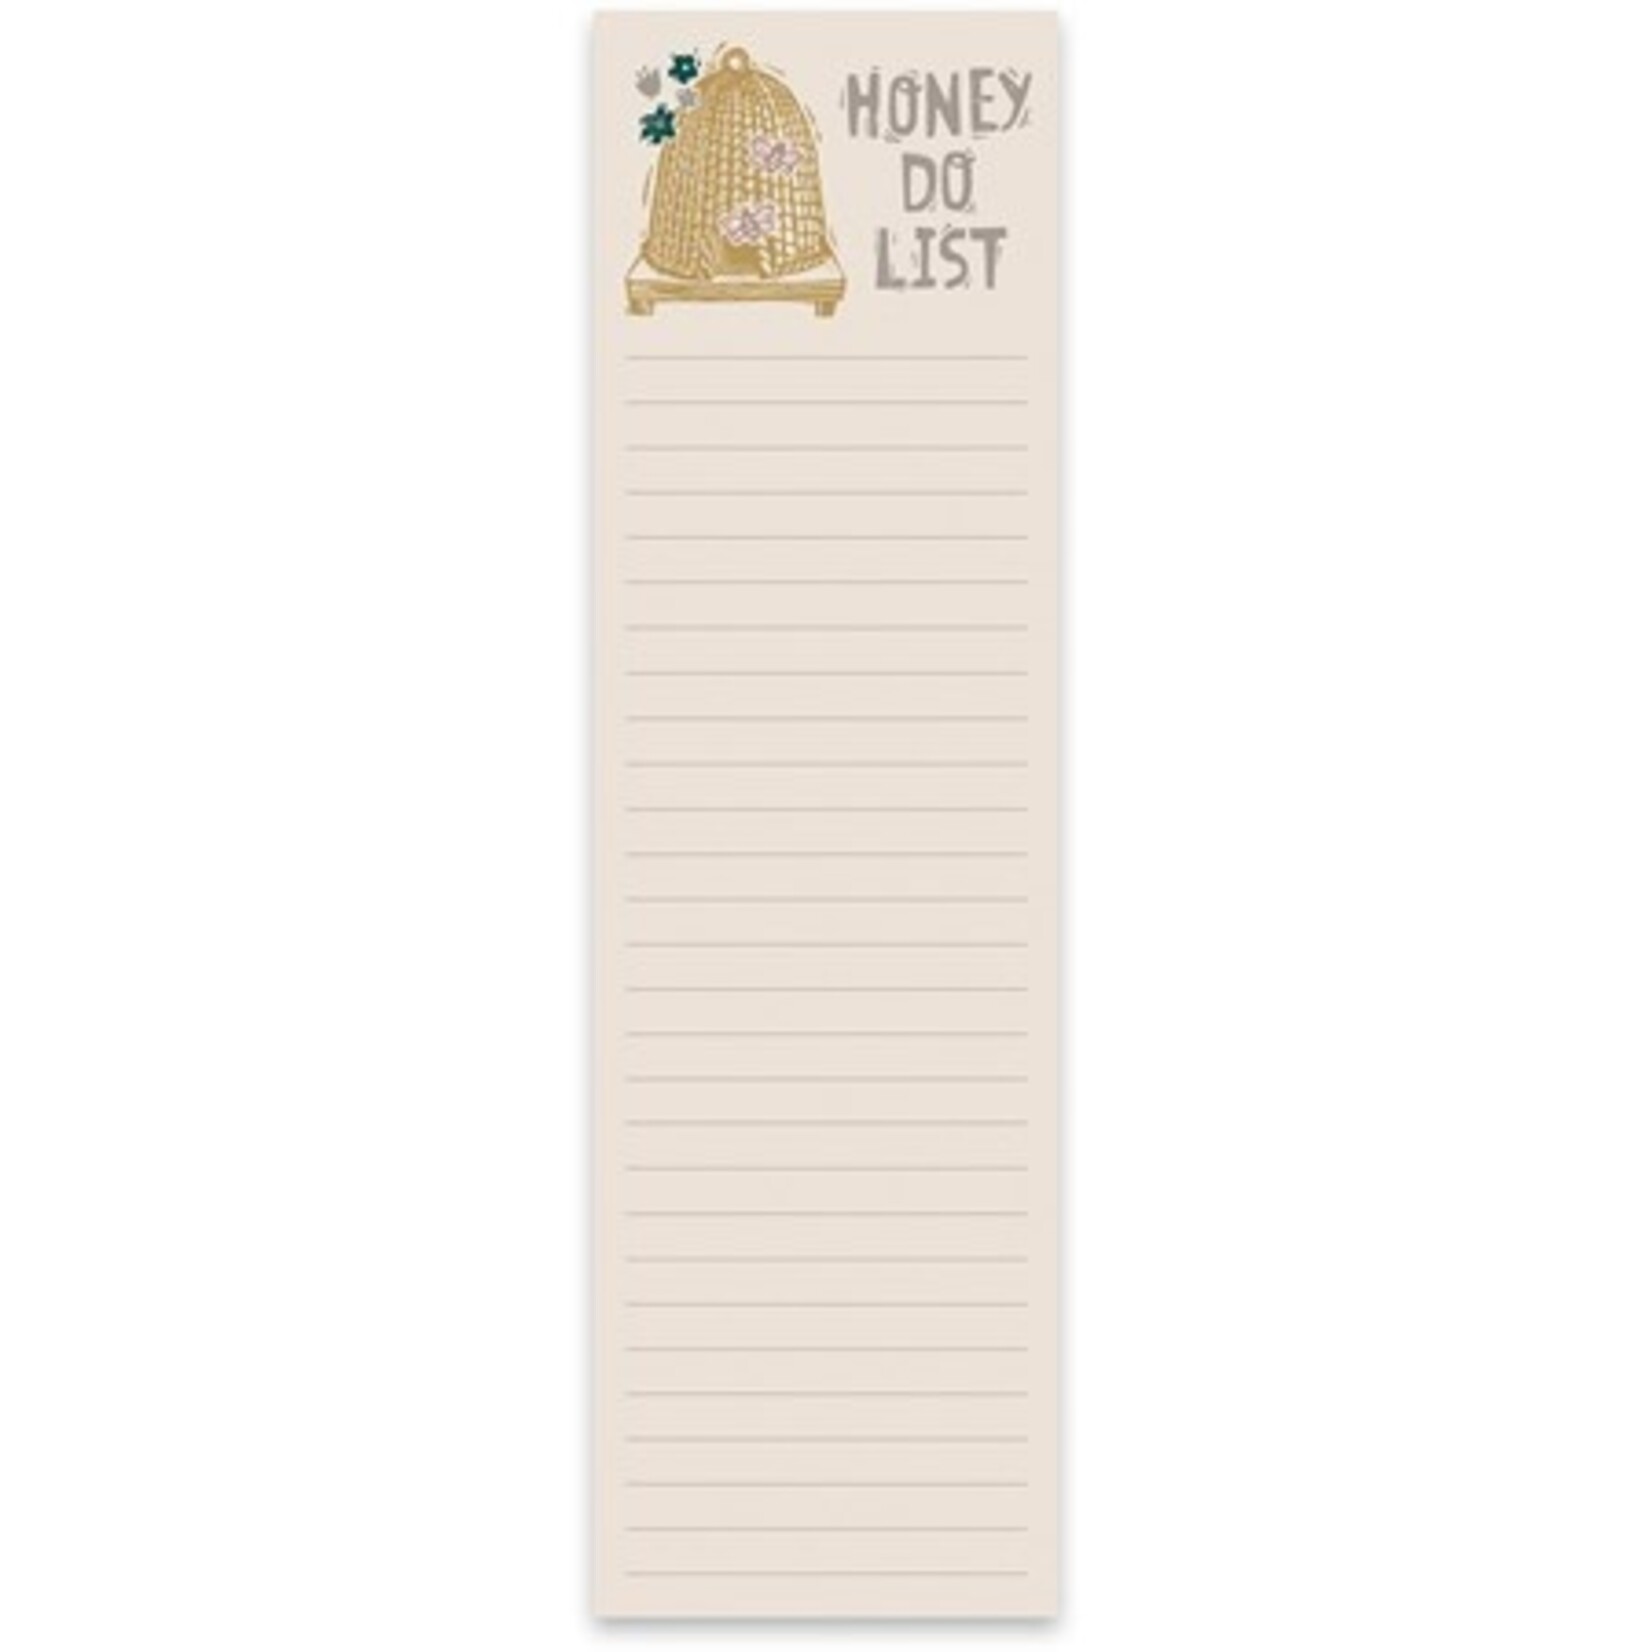 Primatives by Kathy Honey do List Pad